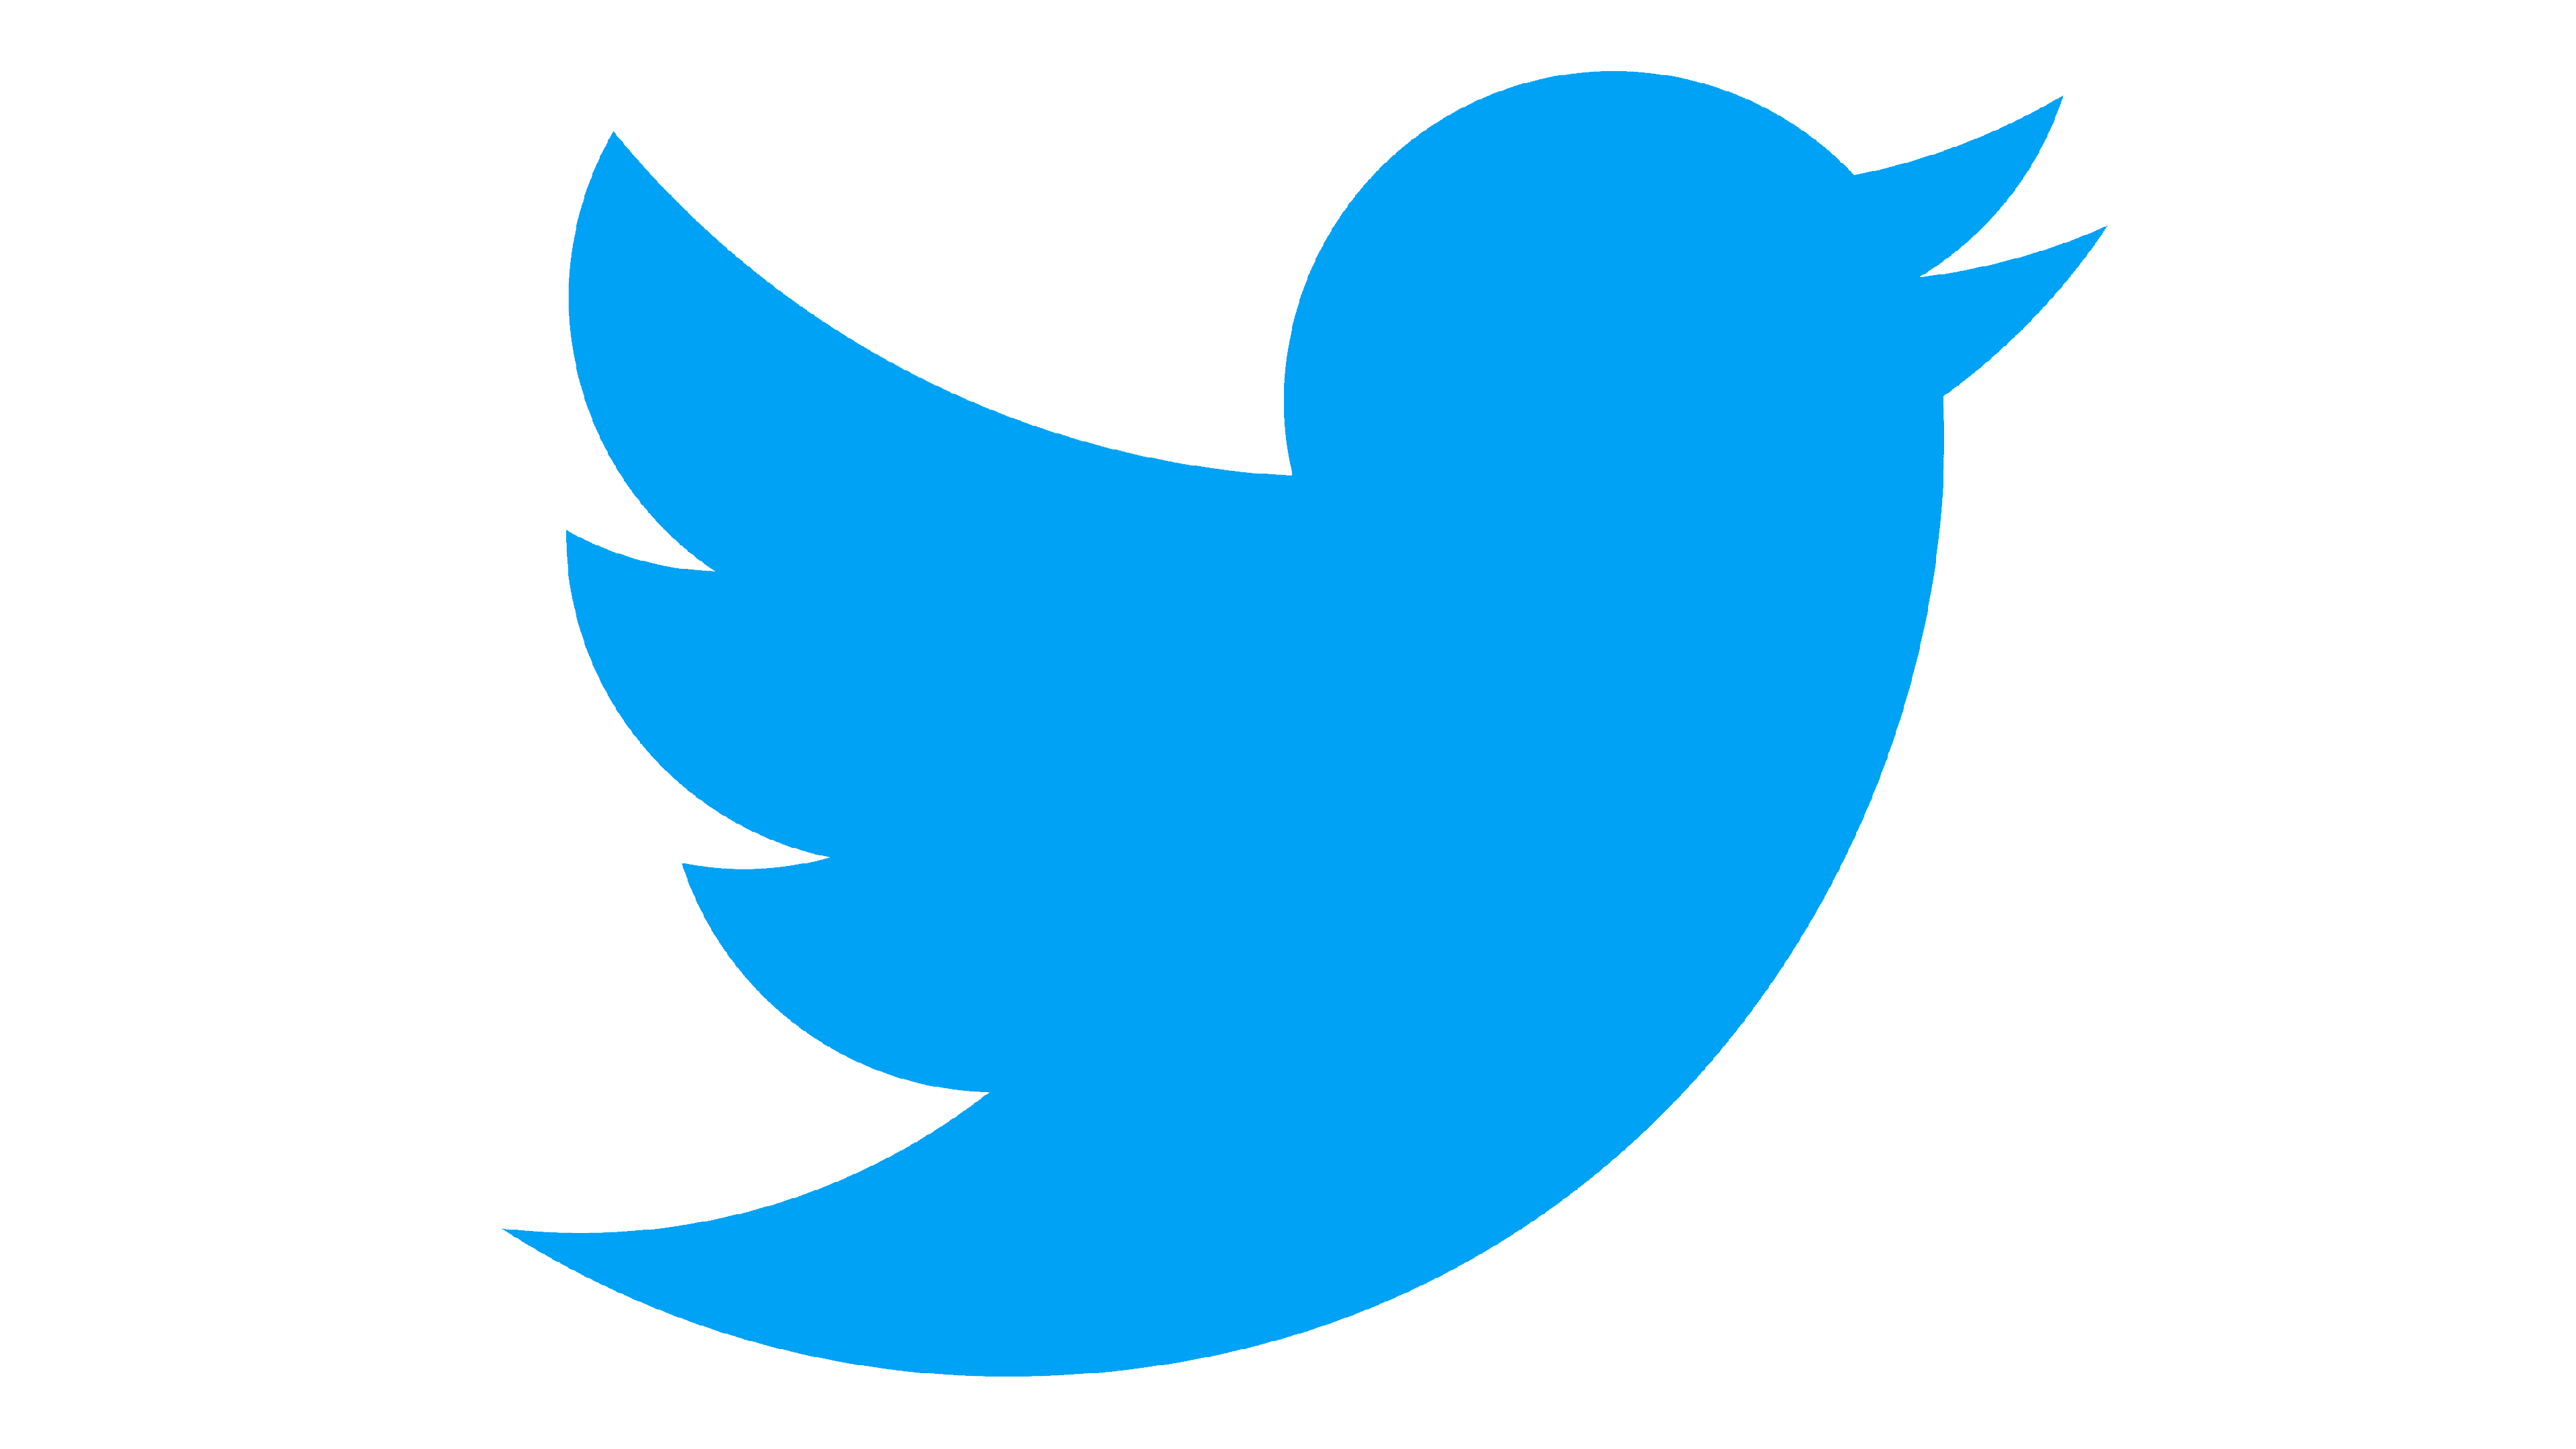 Twitter Logo and symbol, meaning, history, sign.